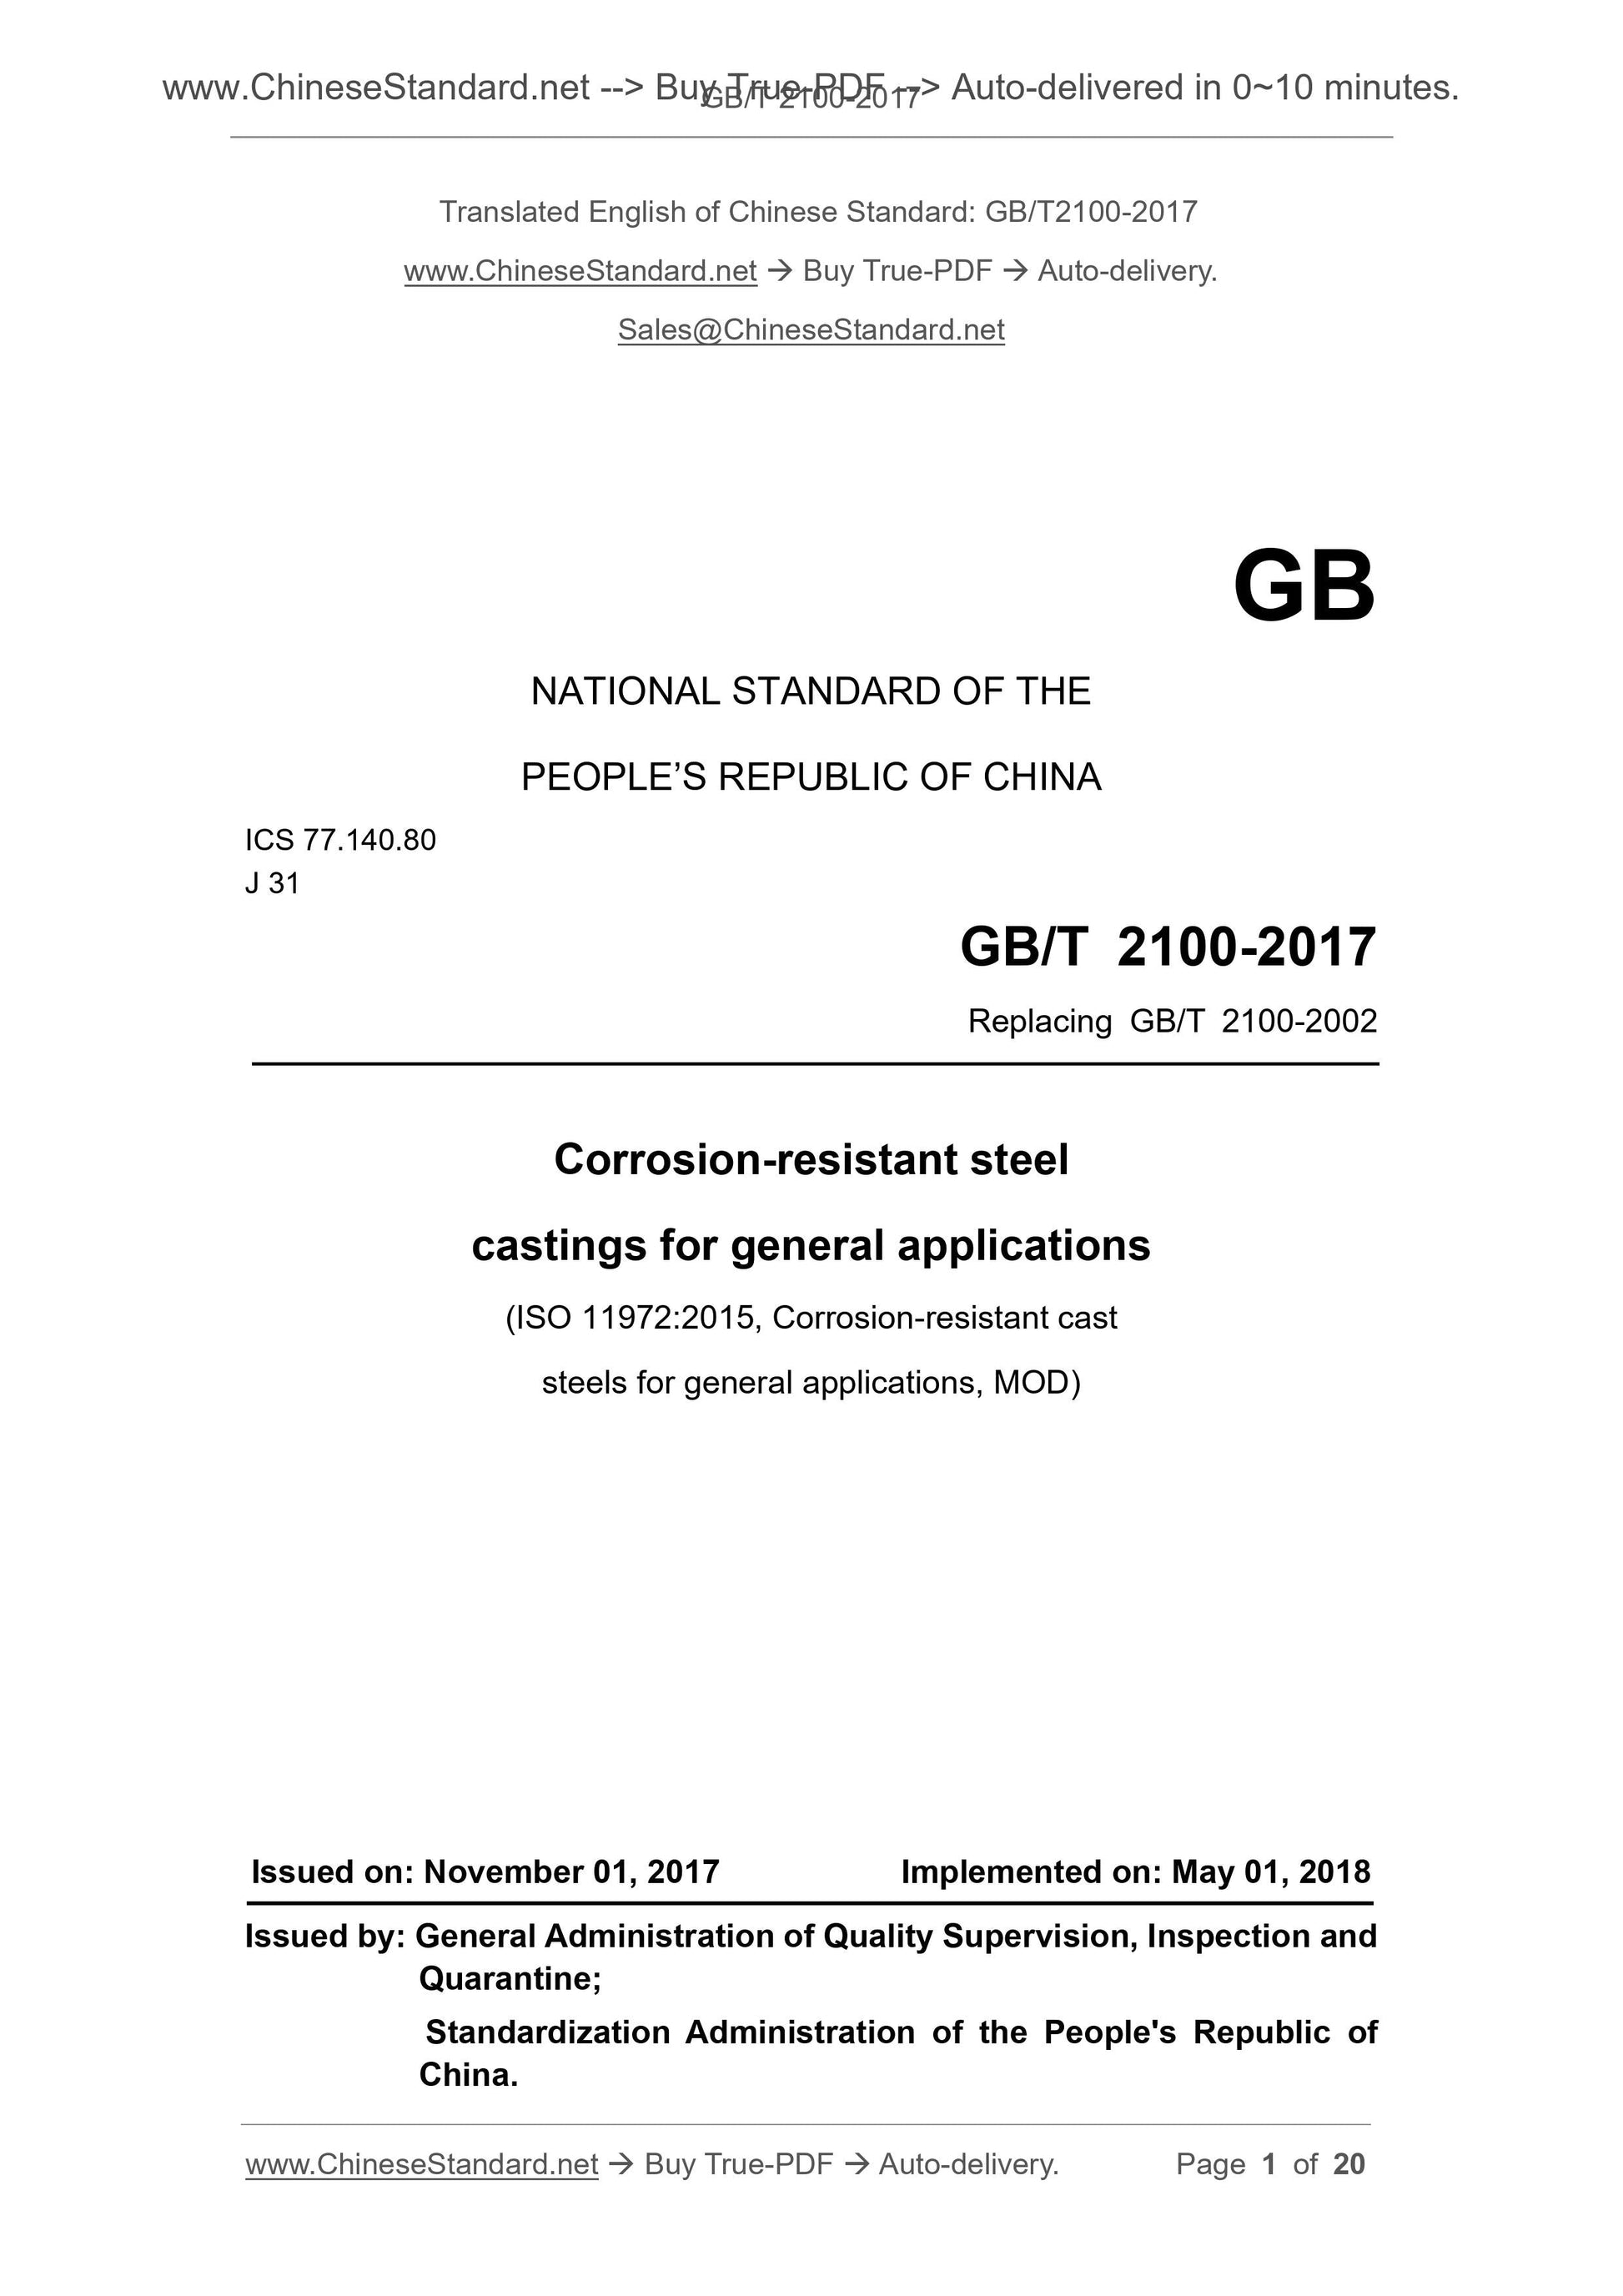 GB/T 2100-2017 Page 1